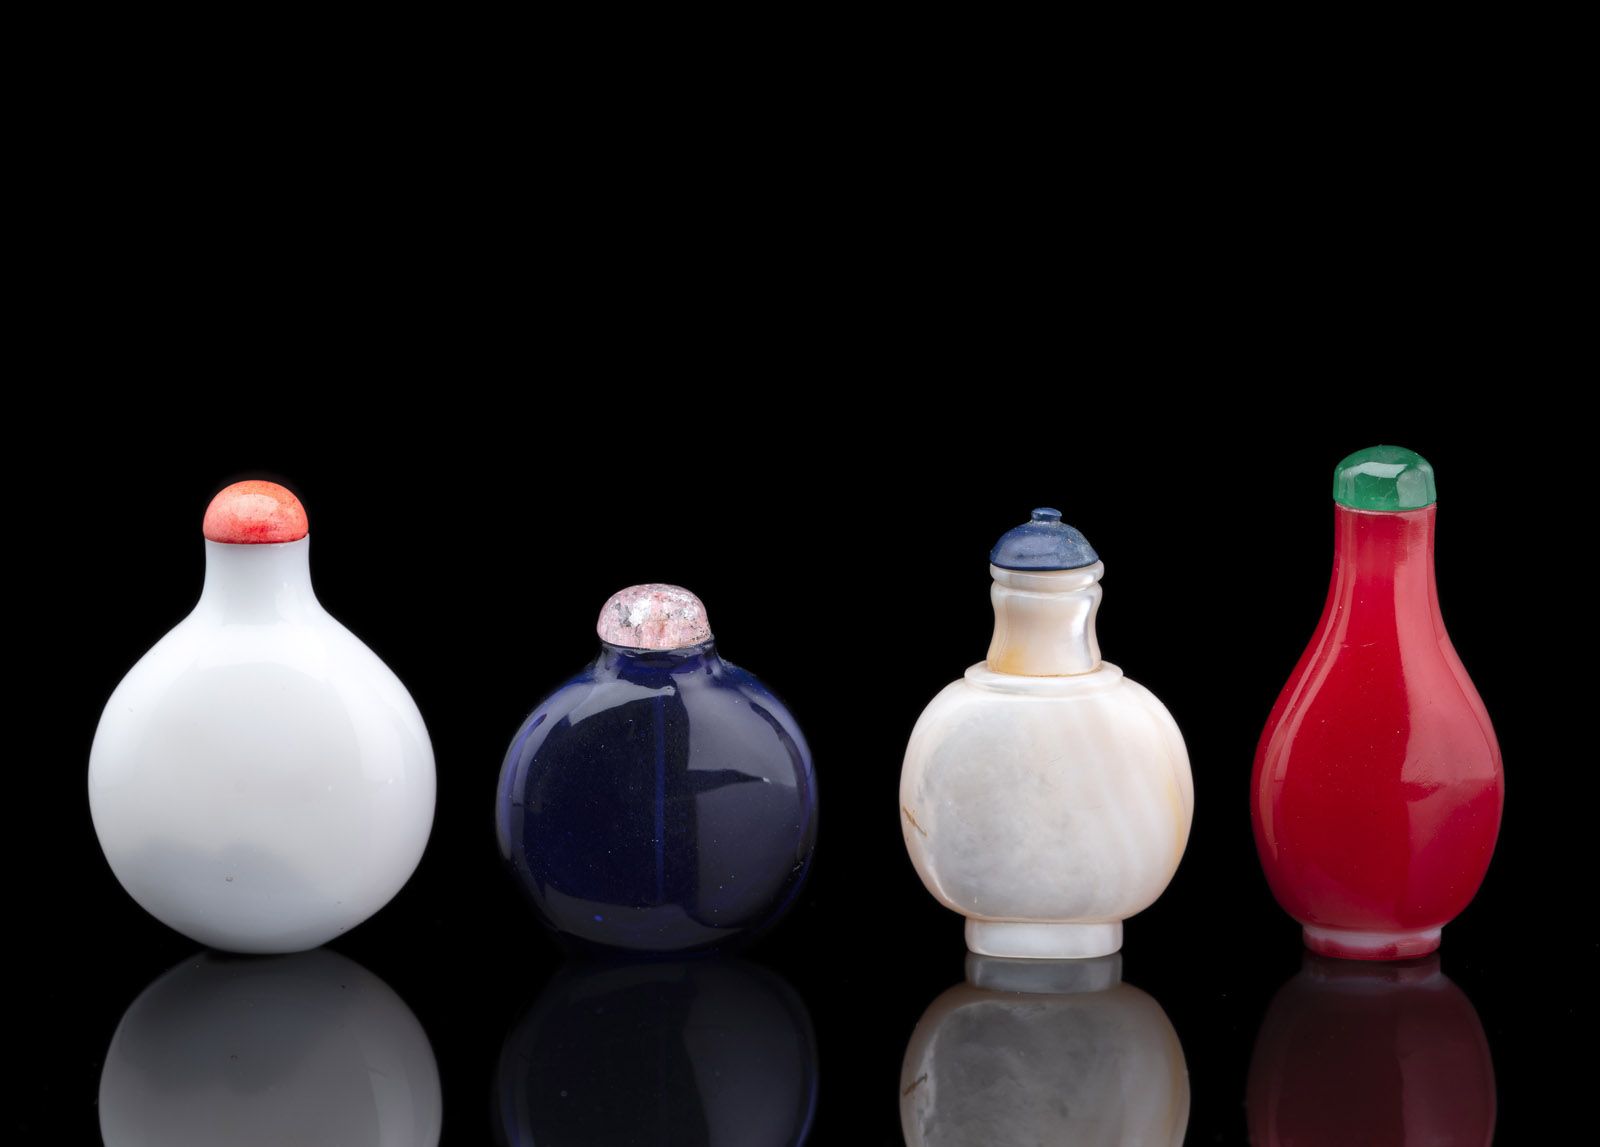 <b>A GROUP OF THREE MONOCHROME GLASS SNUFFBOTTLES AND A MOTHER-OF-PEARL SNUFFBOTTLE</b>